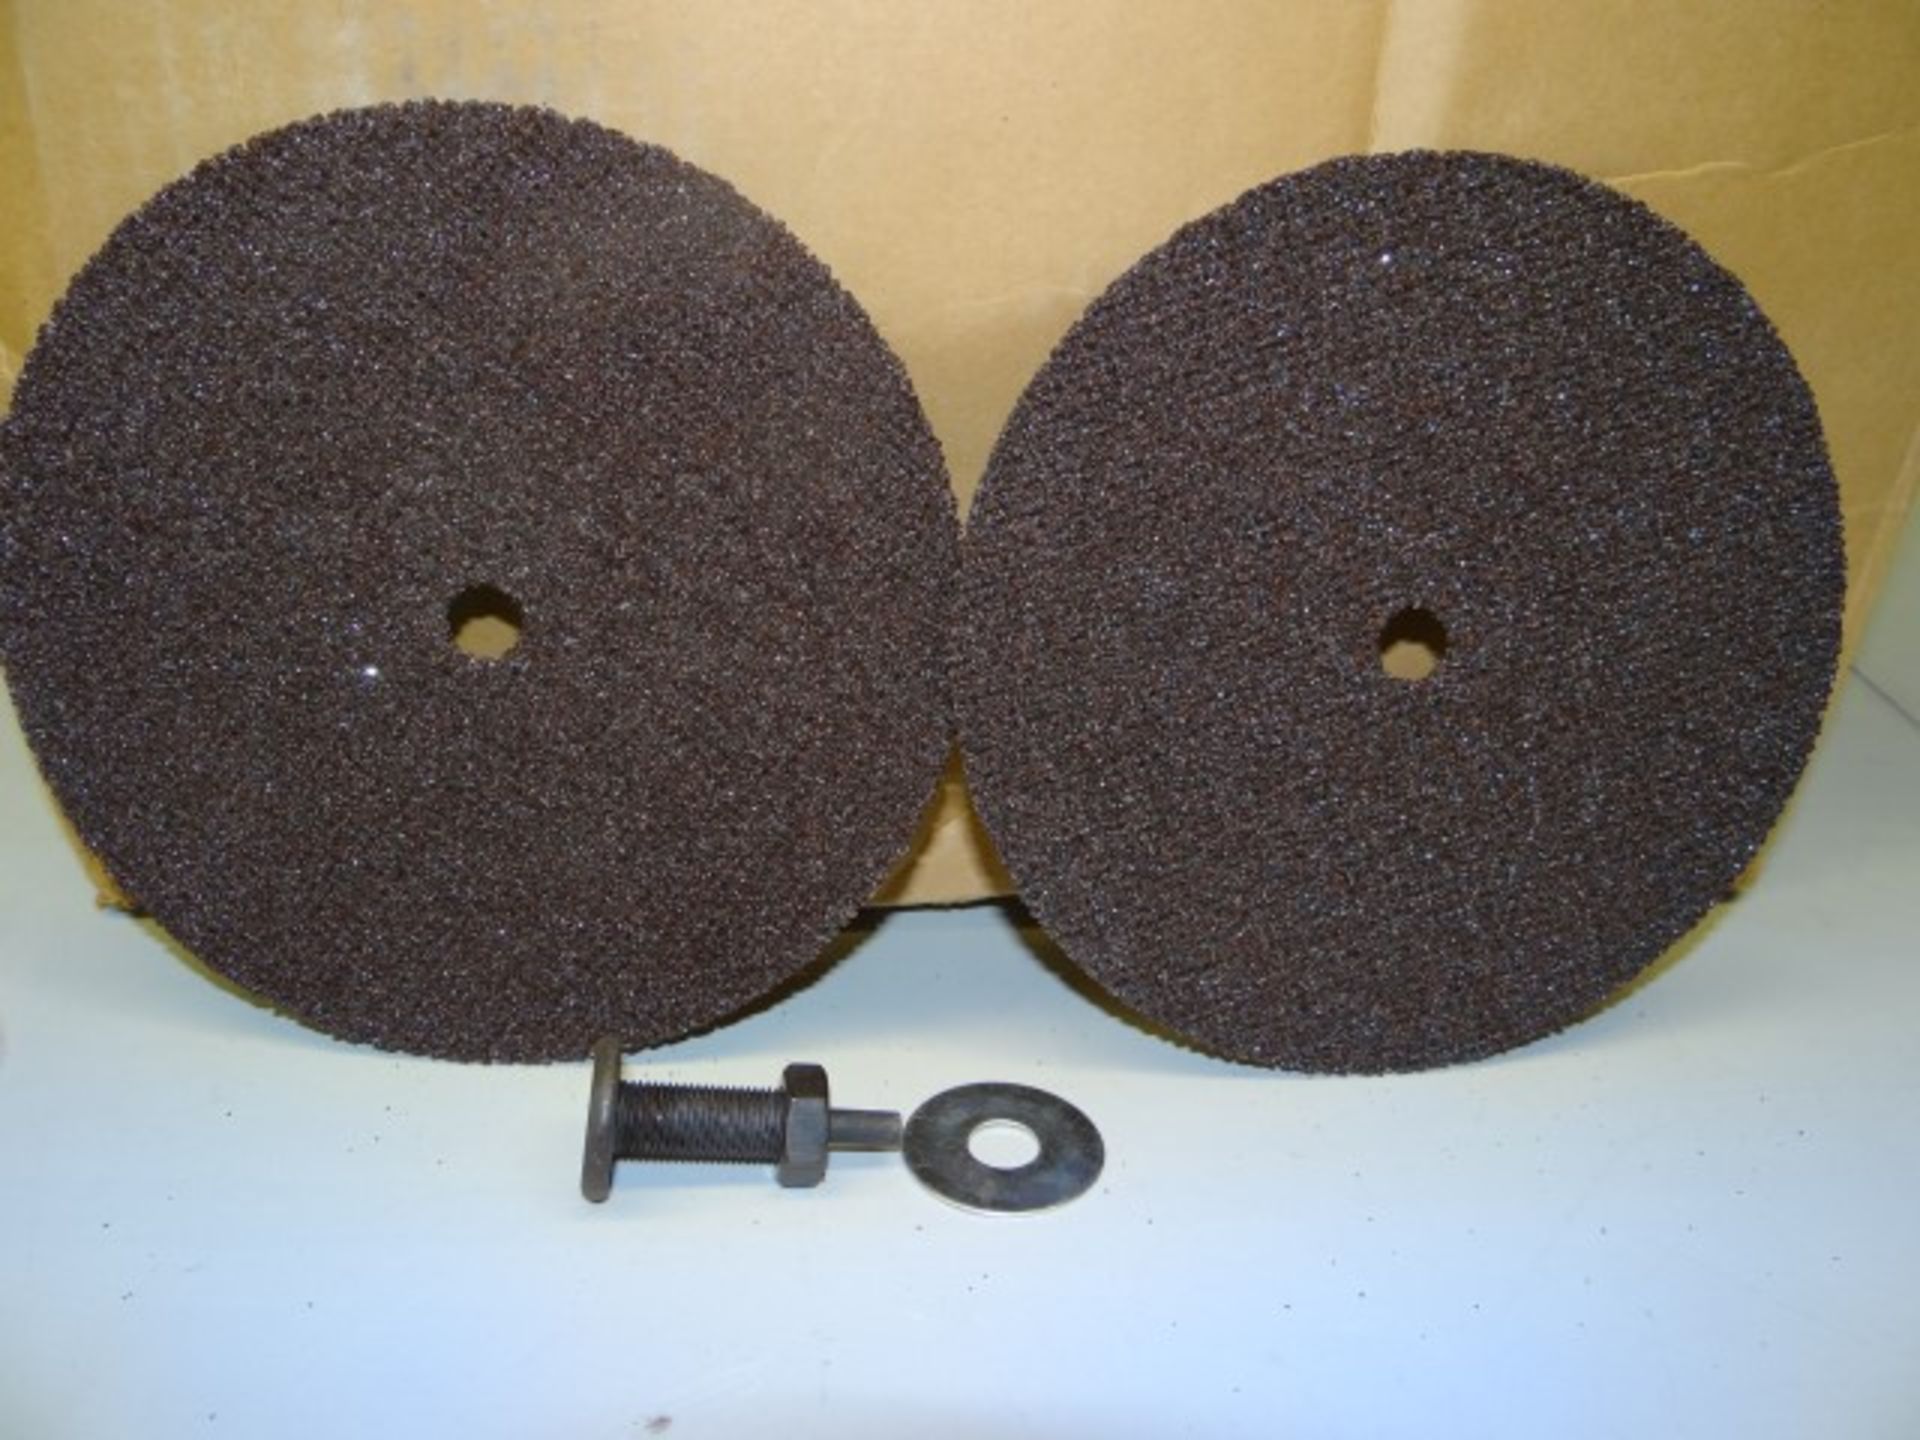 7" Aluminum Oxide Grinding and Cut Off Discs. 12 Blister Packs/Case with 2 Disks Per Pack with Arbor - Image 3 of 3